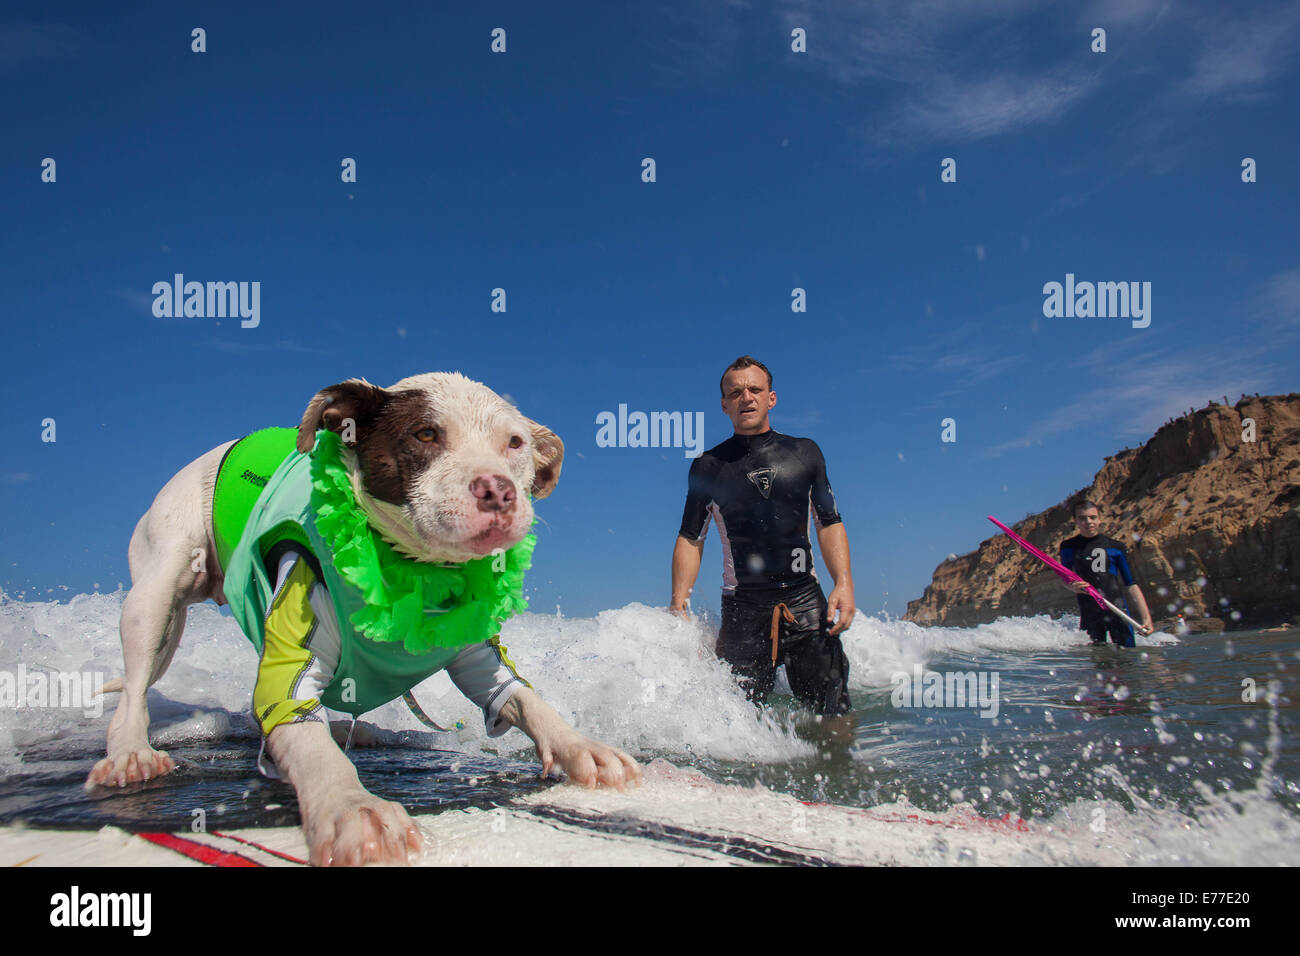 Delmar, CA, US. 7th Sep, 2014. Surf Dog Surf-A-Thon, Surf Dog competiton held at Delmars' dog beach., just North of San Diego. All shapes and sizes of canines showed up for the event.The Surf Dog Surf-A-Thon is a groovy event that raises funds for orphan pets and programs at Helen Woodward Animal Center. Owners and their pets participate.Seen here:.Dog Faith Breed American Pitbull Credit:  Daren Fentiman/ZUMA Wire/Alamy Live News Stock Photo